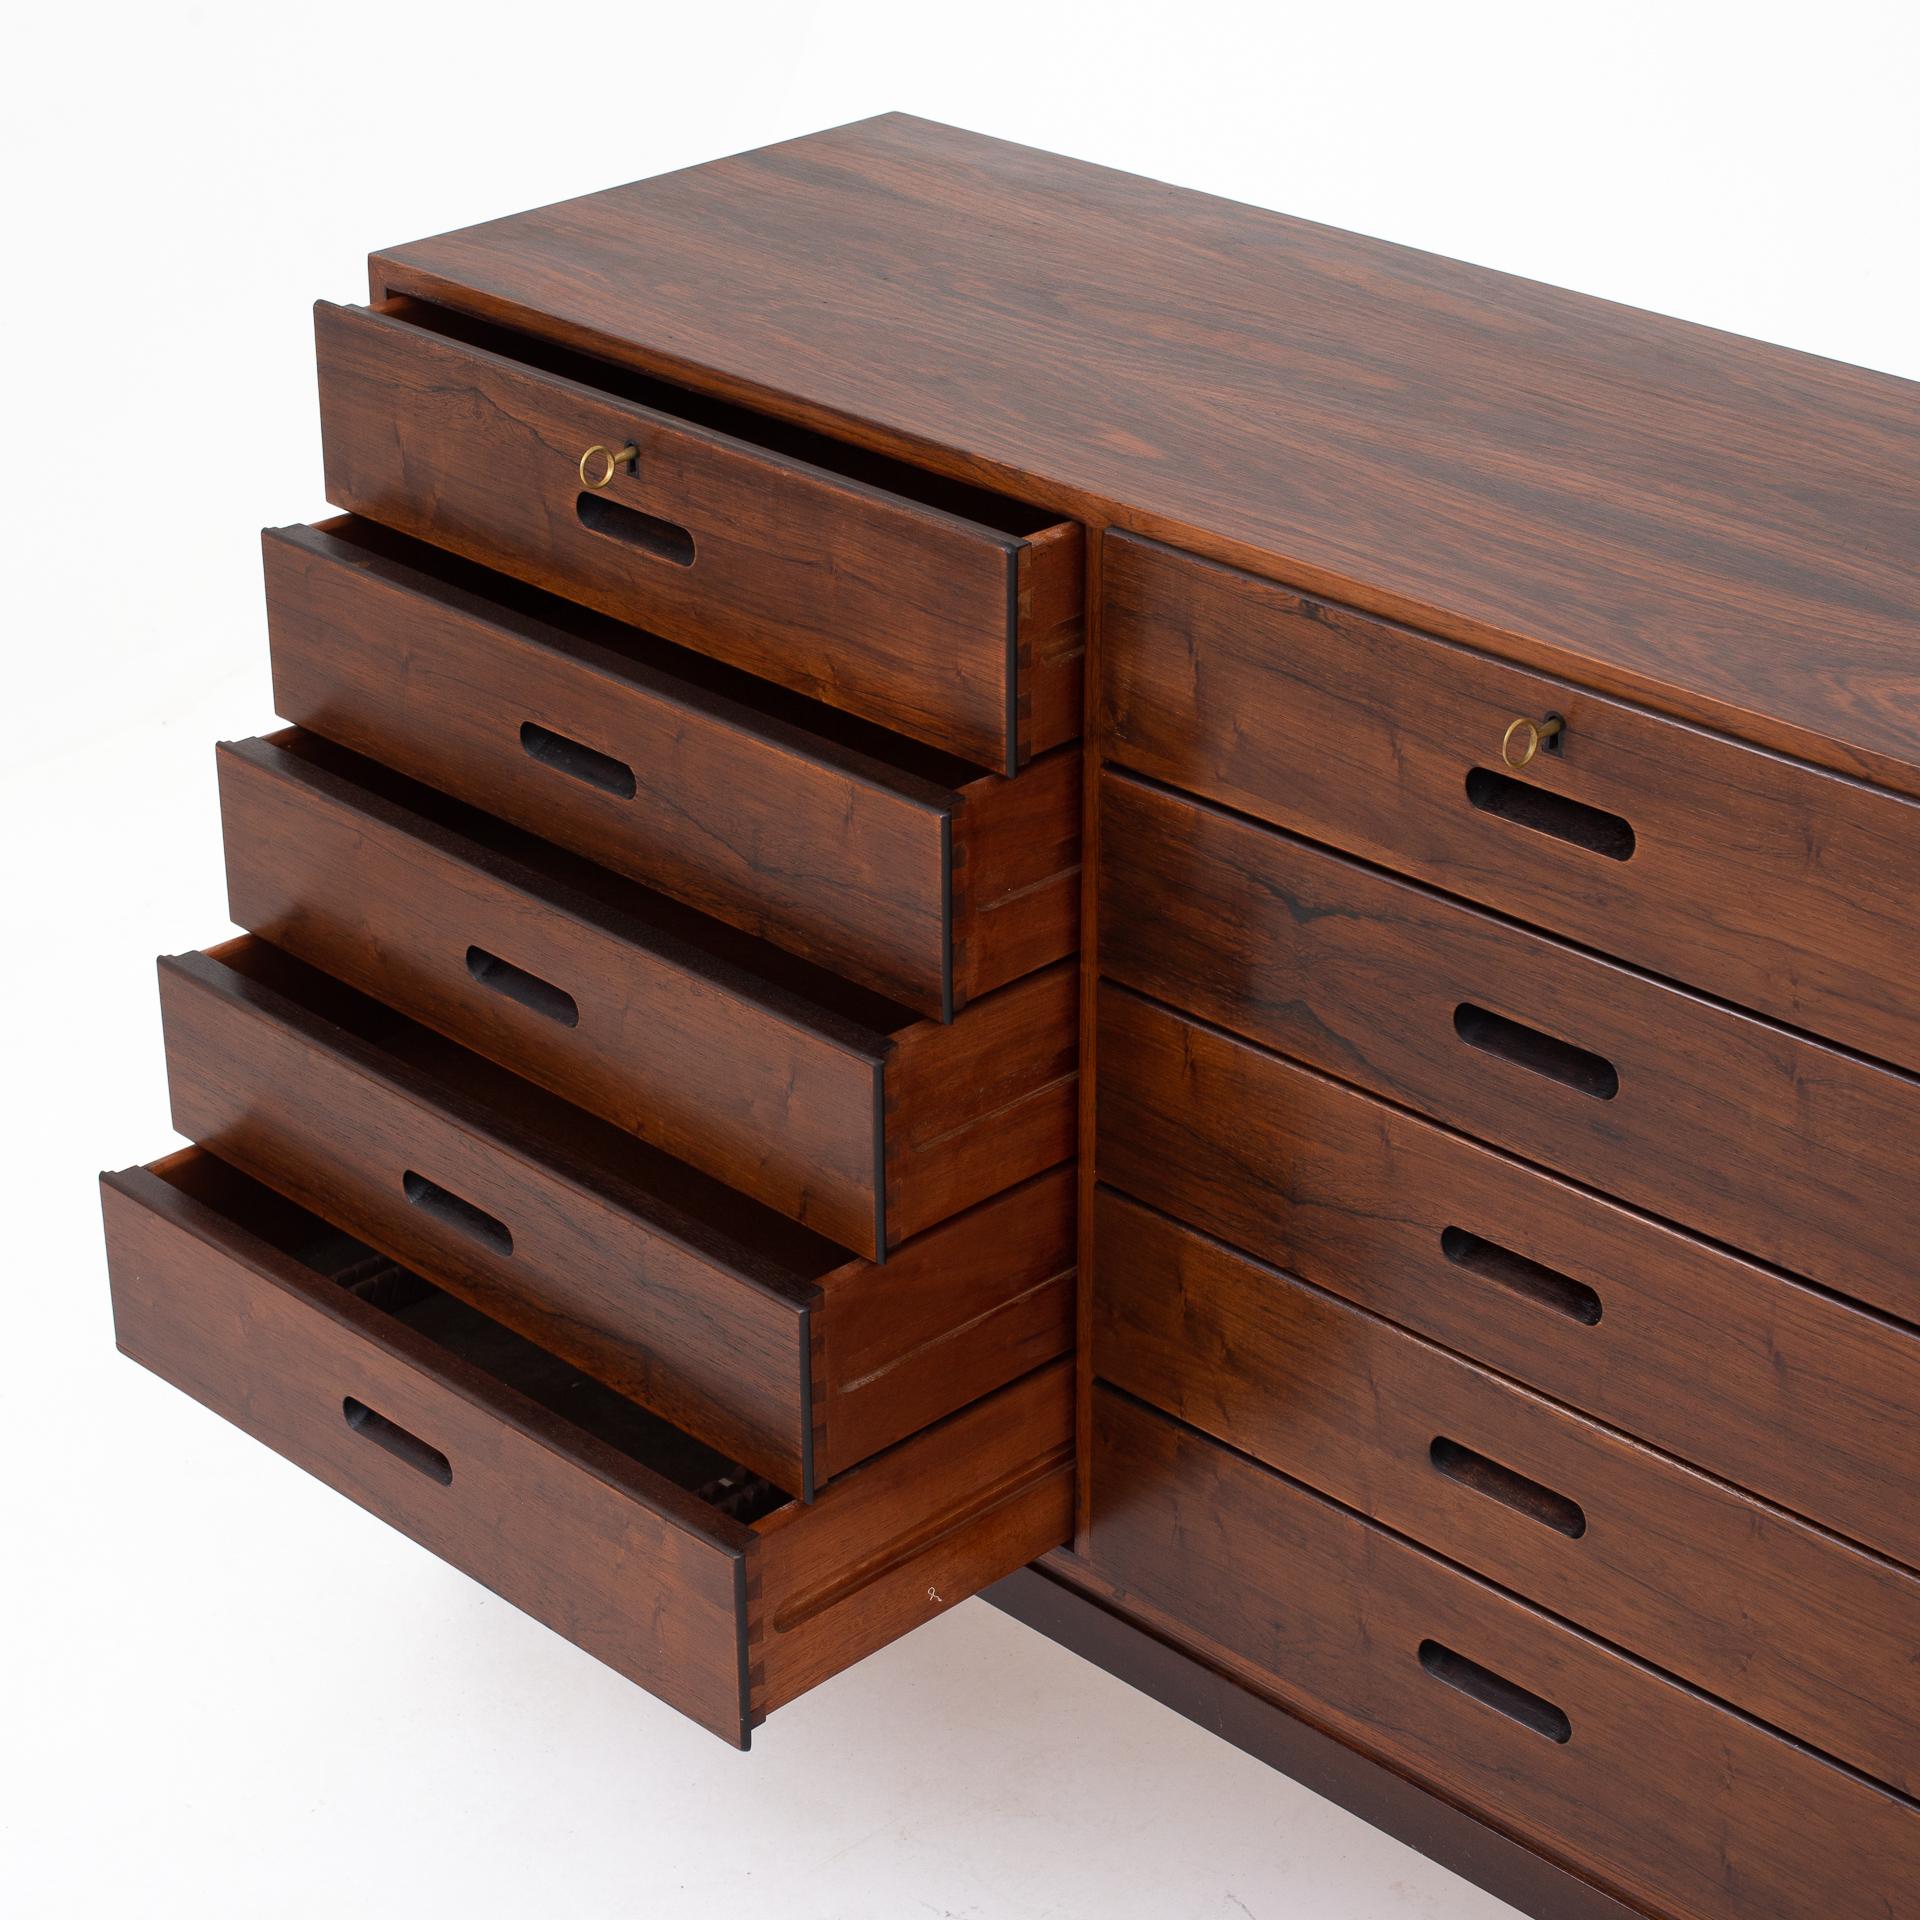 Chest of drawers or drawer cabinet in rosewood with 15 drawers and tapered legs. Maker P. Jeppesen.